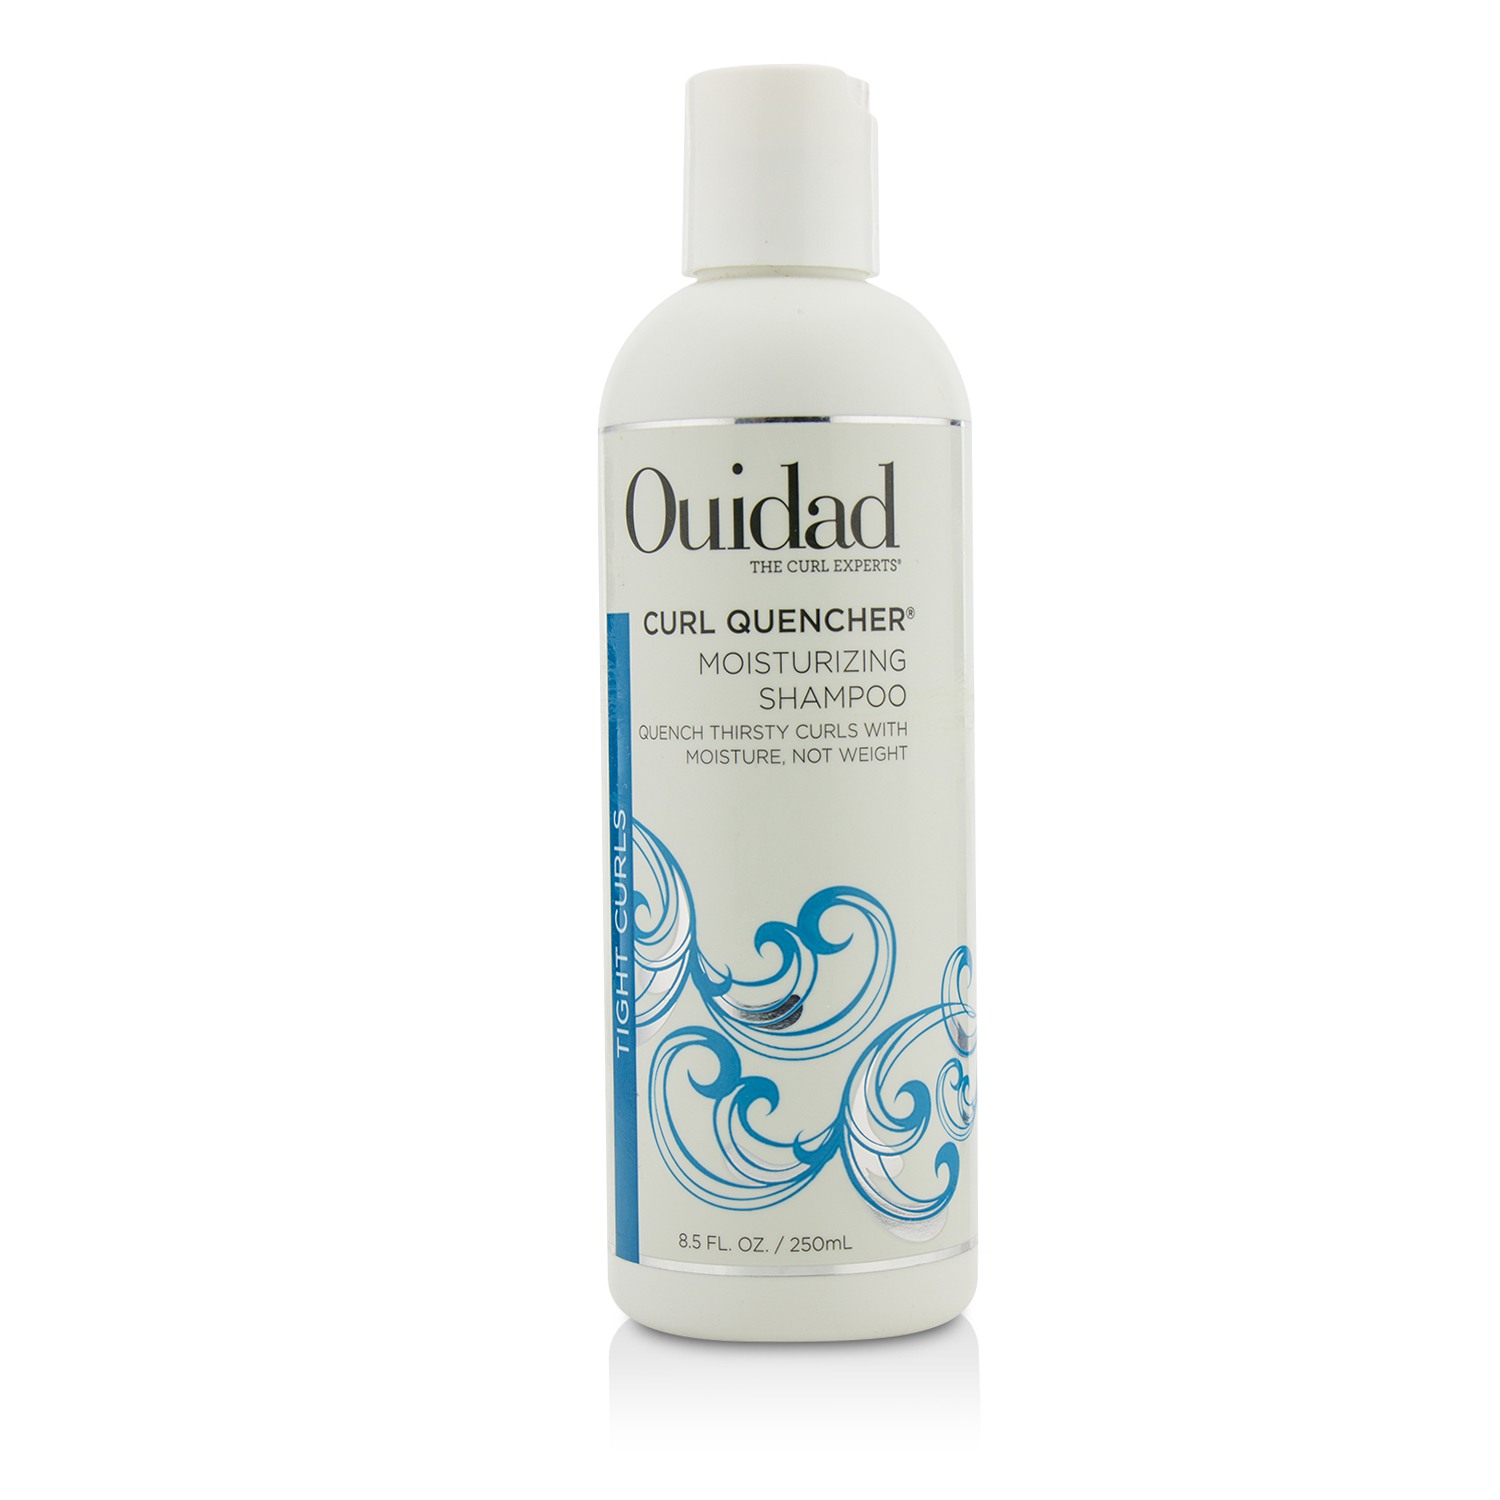 Curl Quencher Moisturizing Shampoo (Tight Curls) Ouidad Image